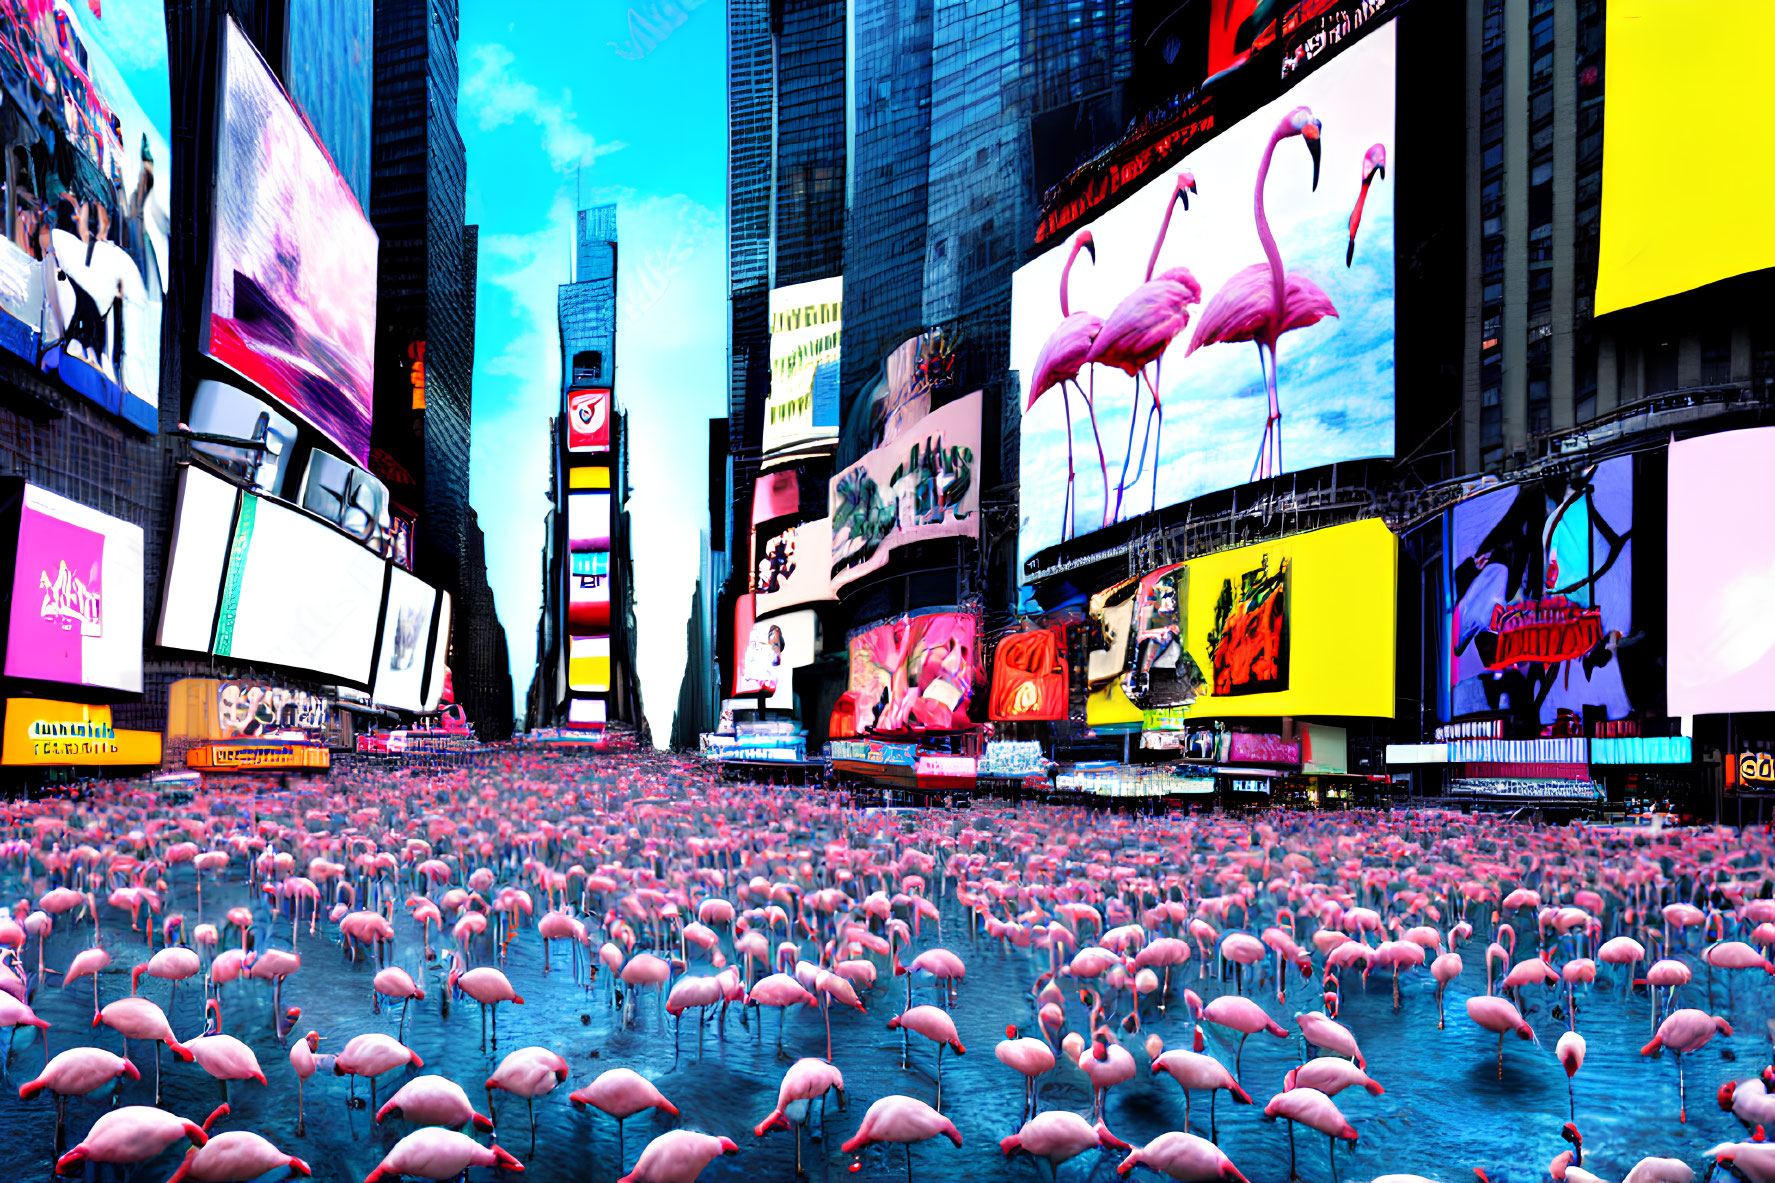 Digitally altered Times Square showcases pink flamingos among vibrant billboards